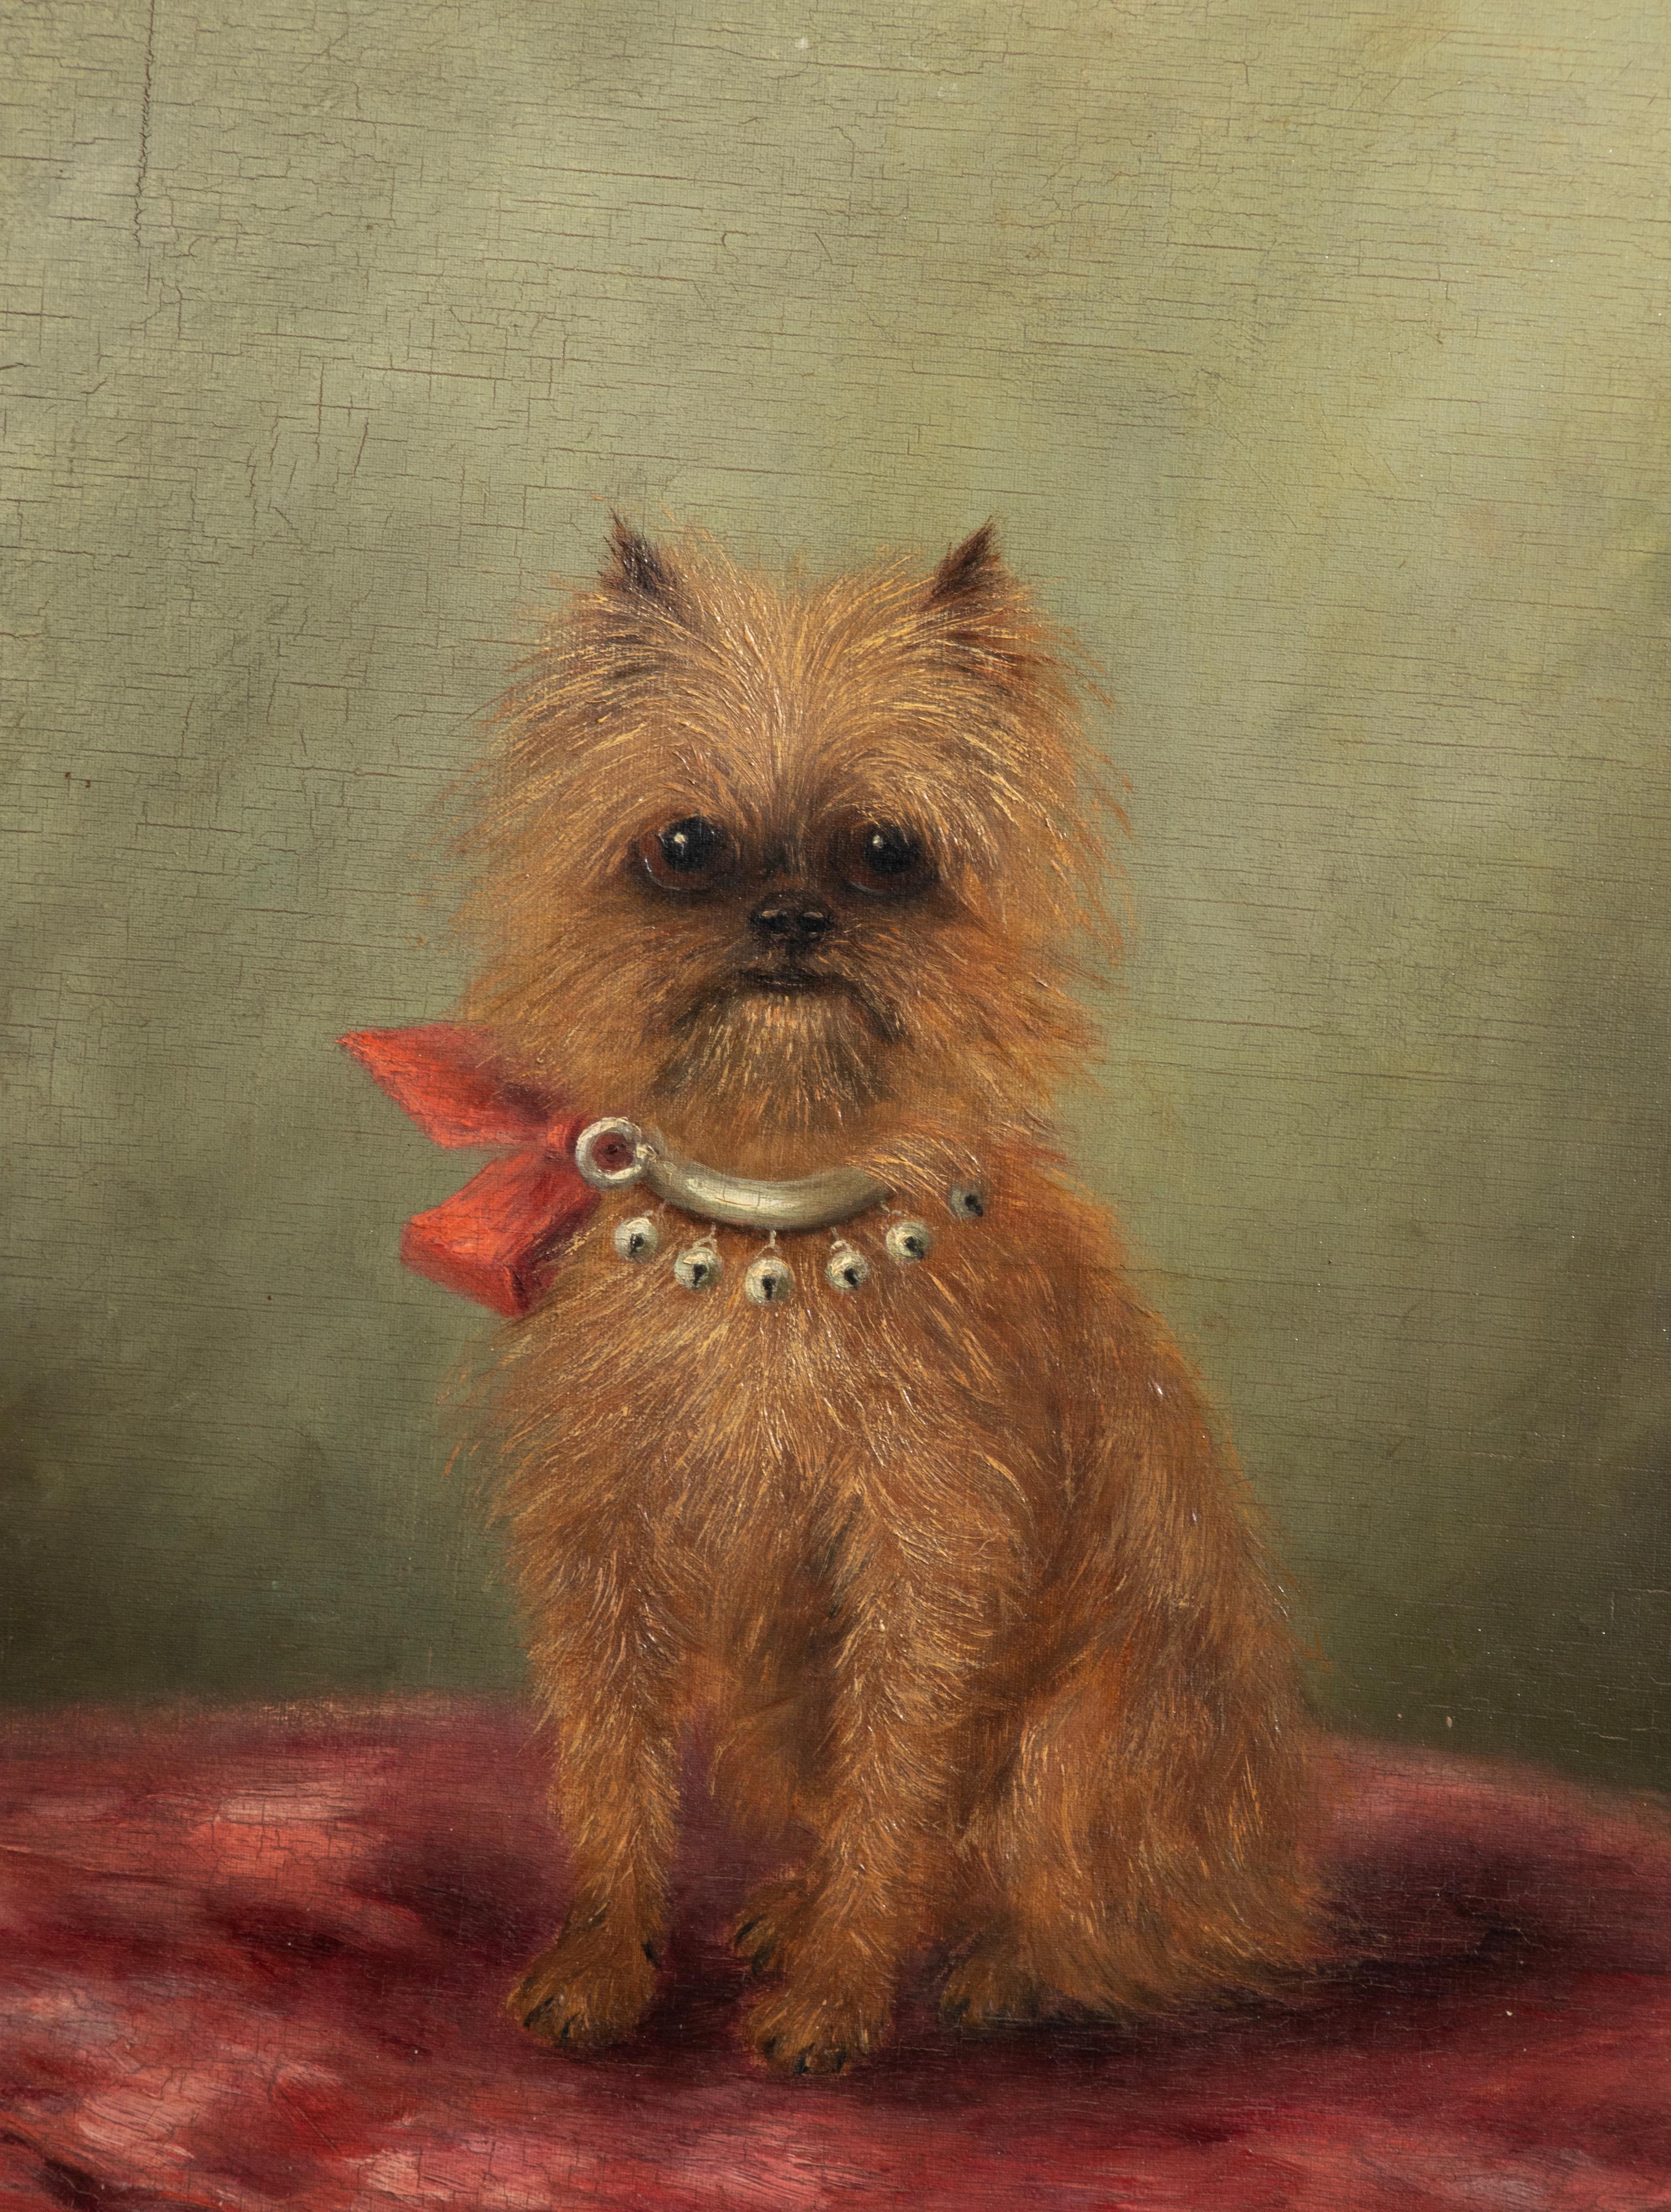 Lovely portrait of a dog, made by the Belgian female artist Zélia Klerx. The dog portrayed is a Griffon de Bruxelles, a small companion dog.
Zélia Klerx was an artist from the Belgian region of the Ardennes, she made paintings commissioned by